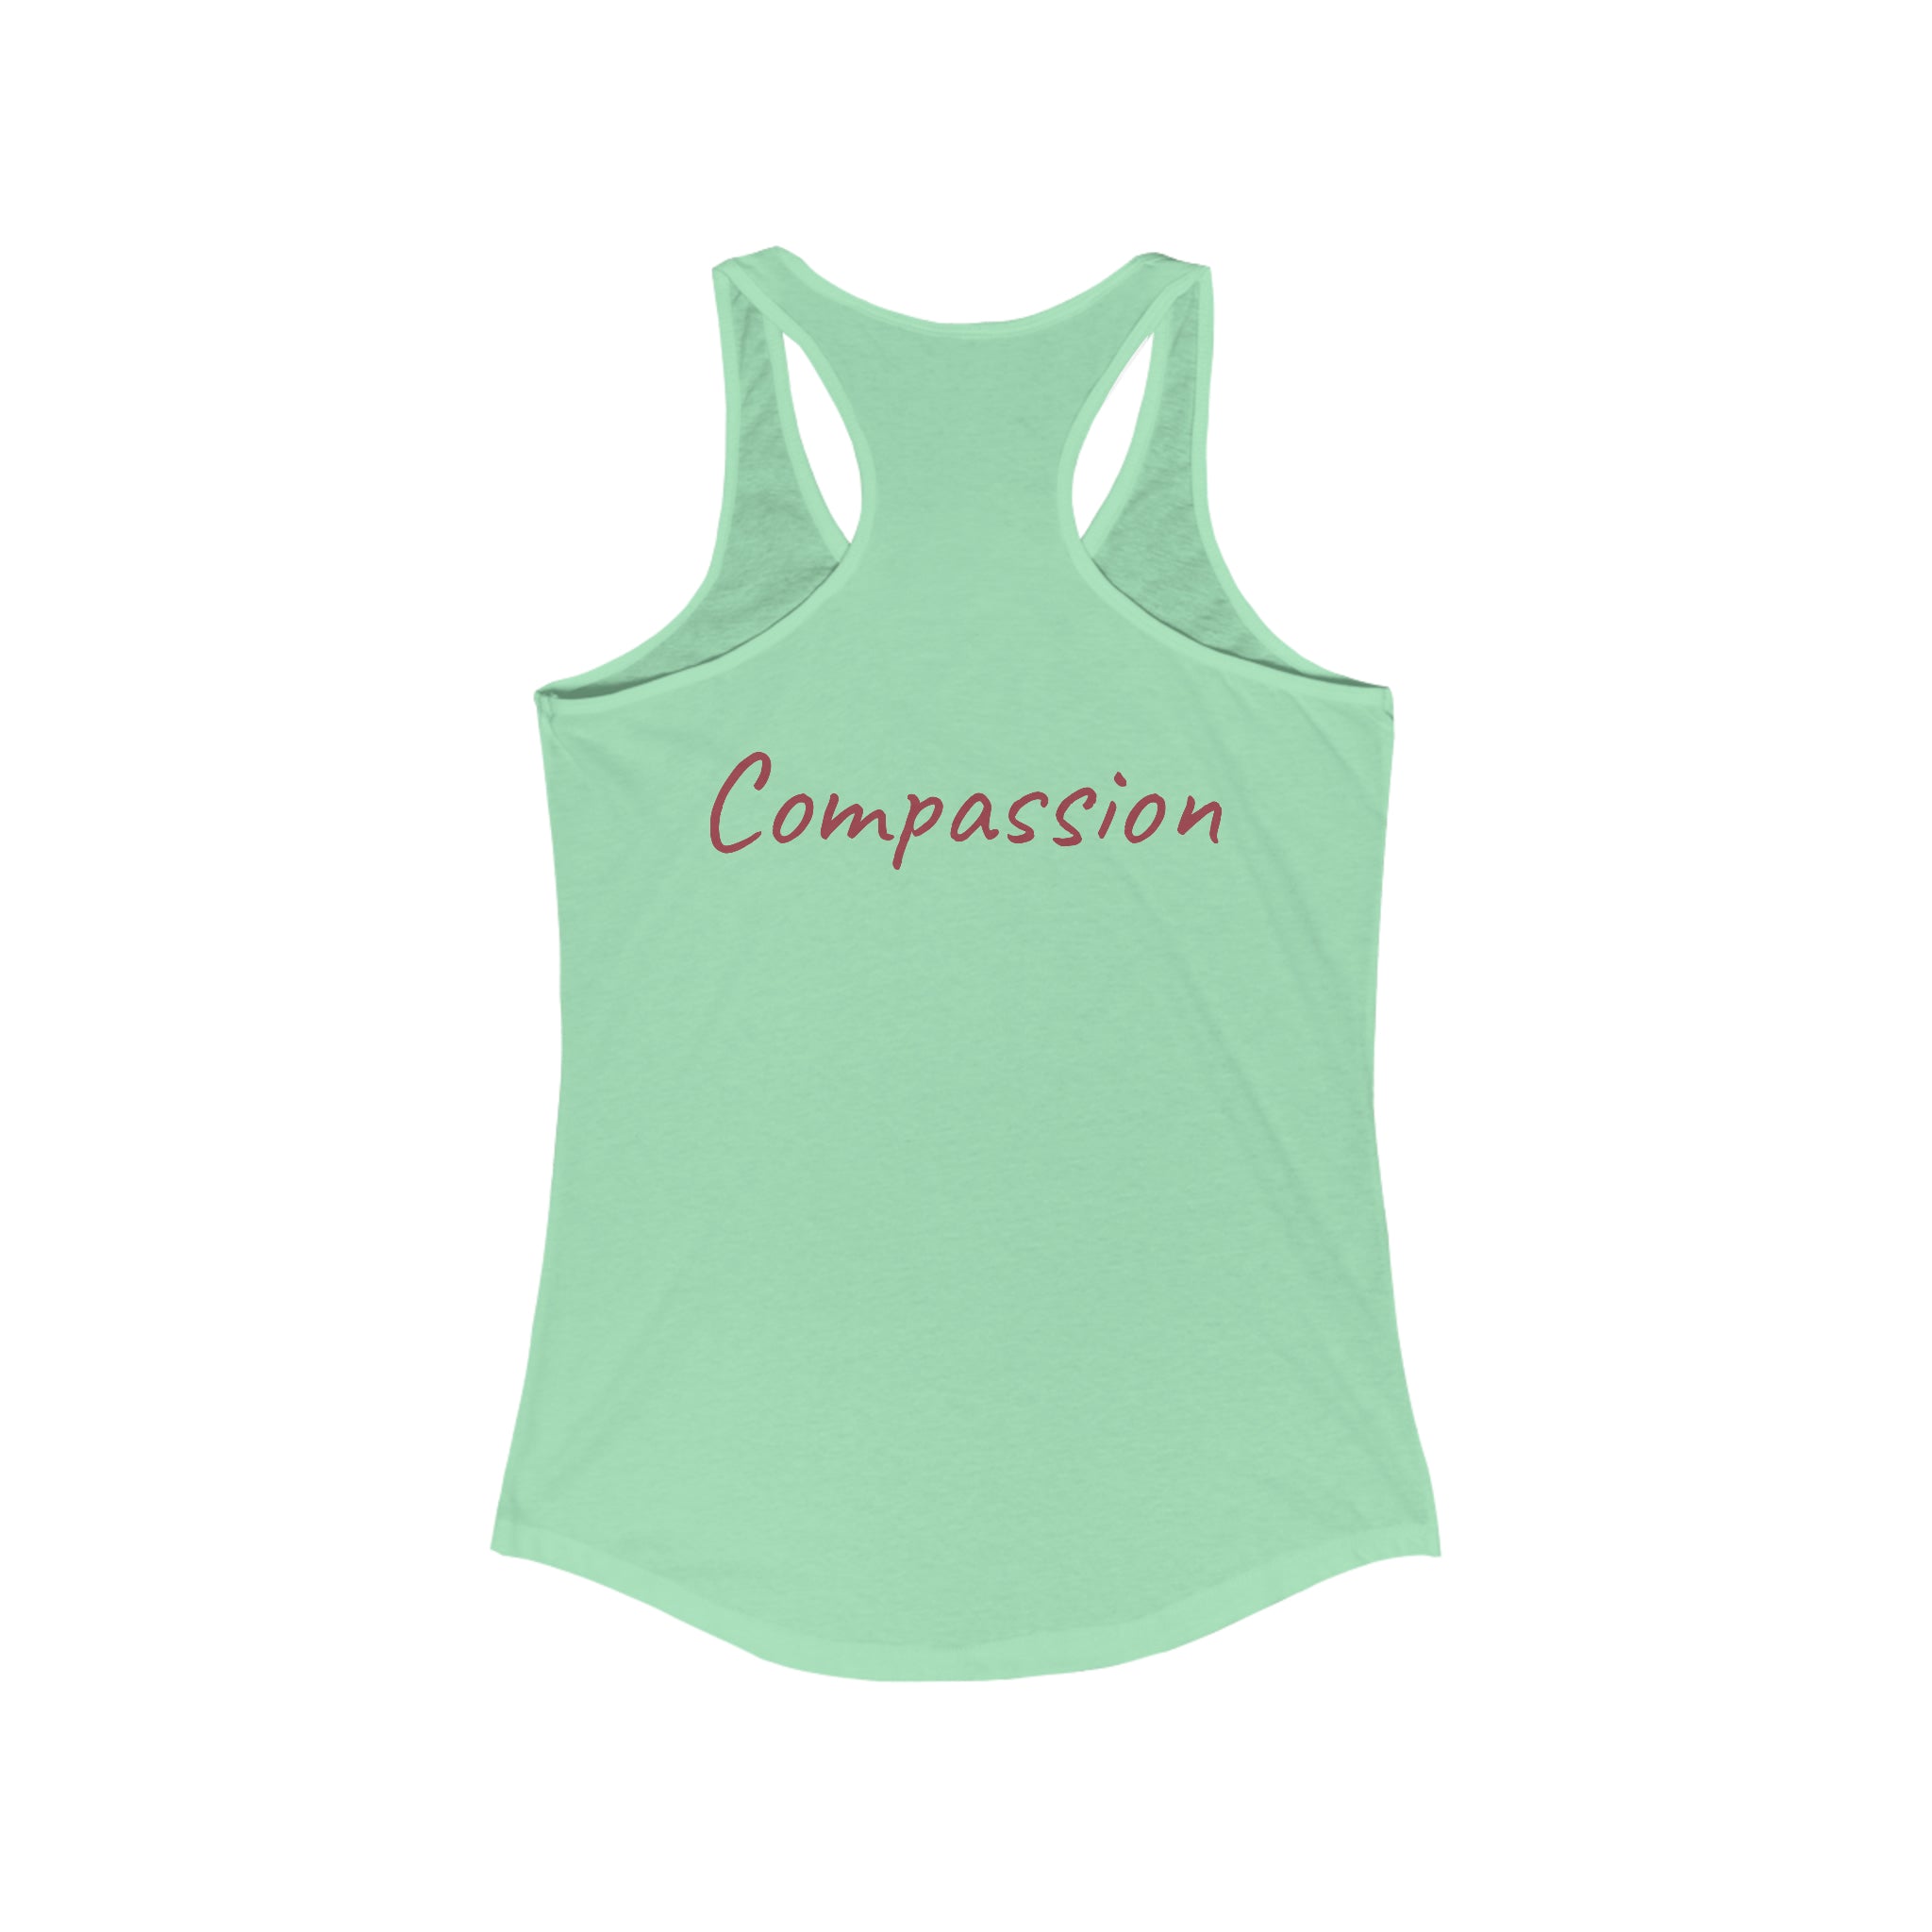 Compassion Racerback Tank: Fashion meets advocacy Solid Mint Activewear Athletic Tank Gym Clothes Performance Tank Racerback Sleeveless Top Sporty Apparel Tank Top Women's Tank Workout Gear Yoga Tank Tank Top 12371005270777228625_2048_9d63892e-7ada-4c6f-9440-51489342f5c8 Printify